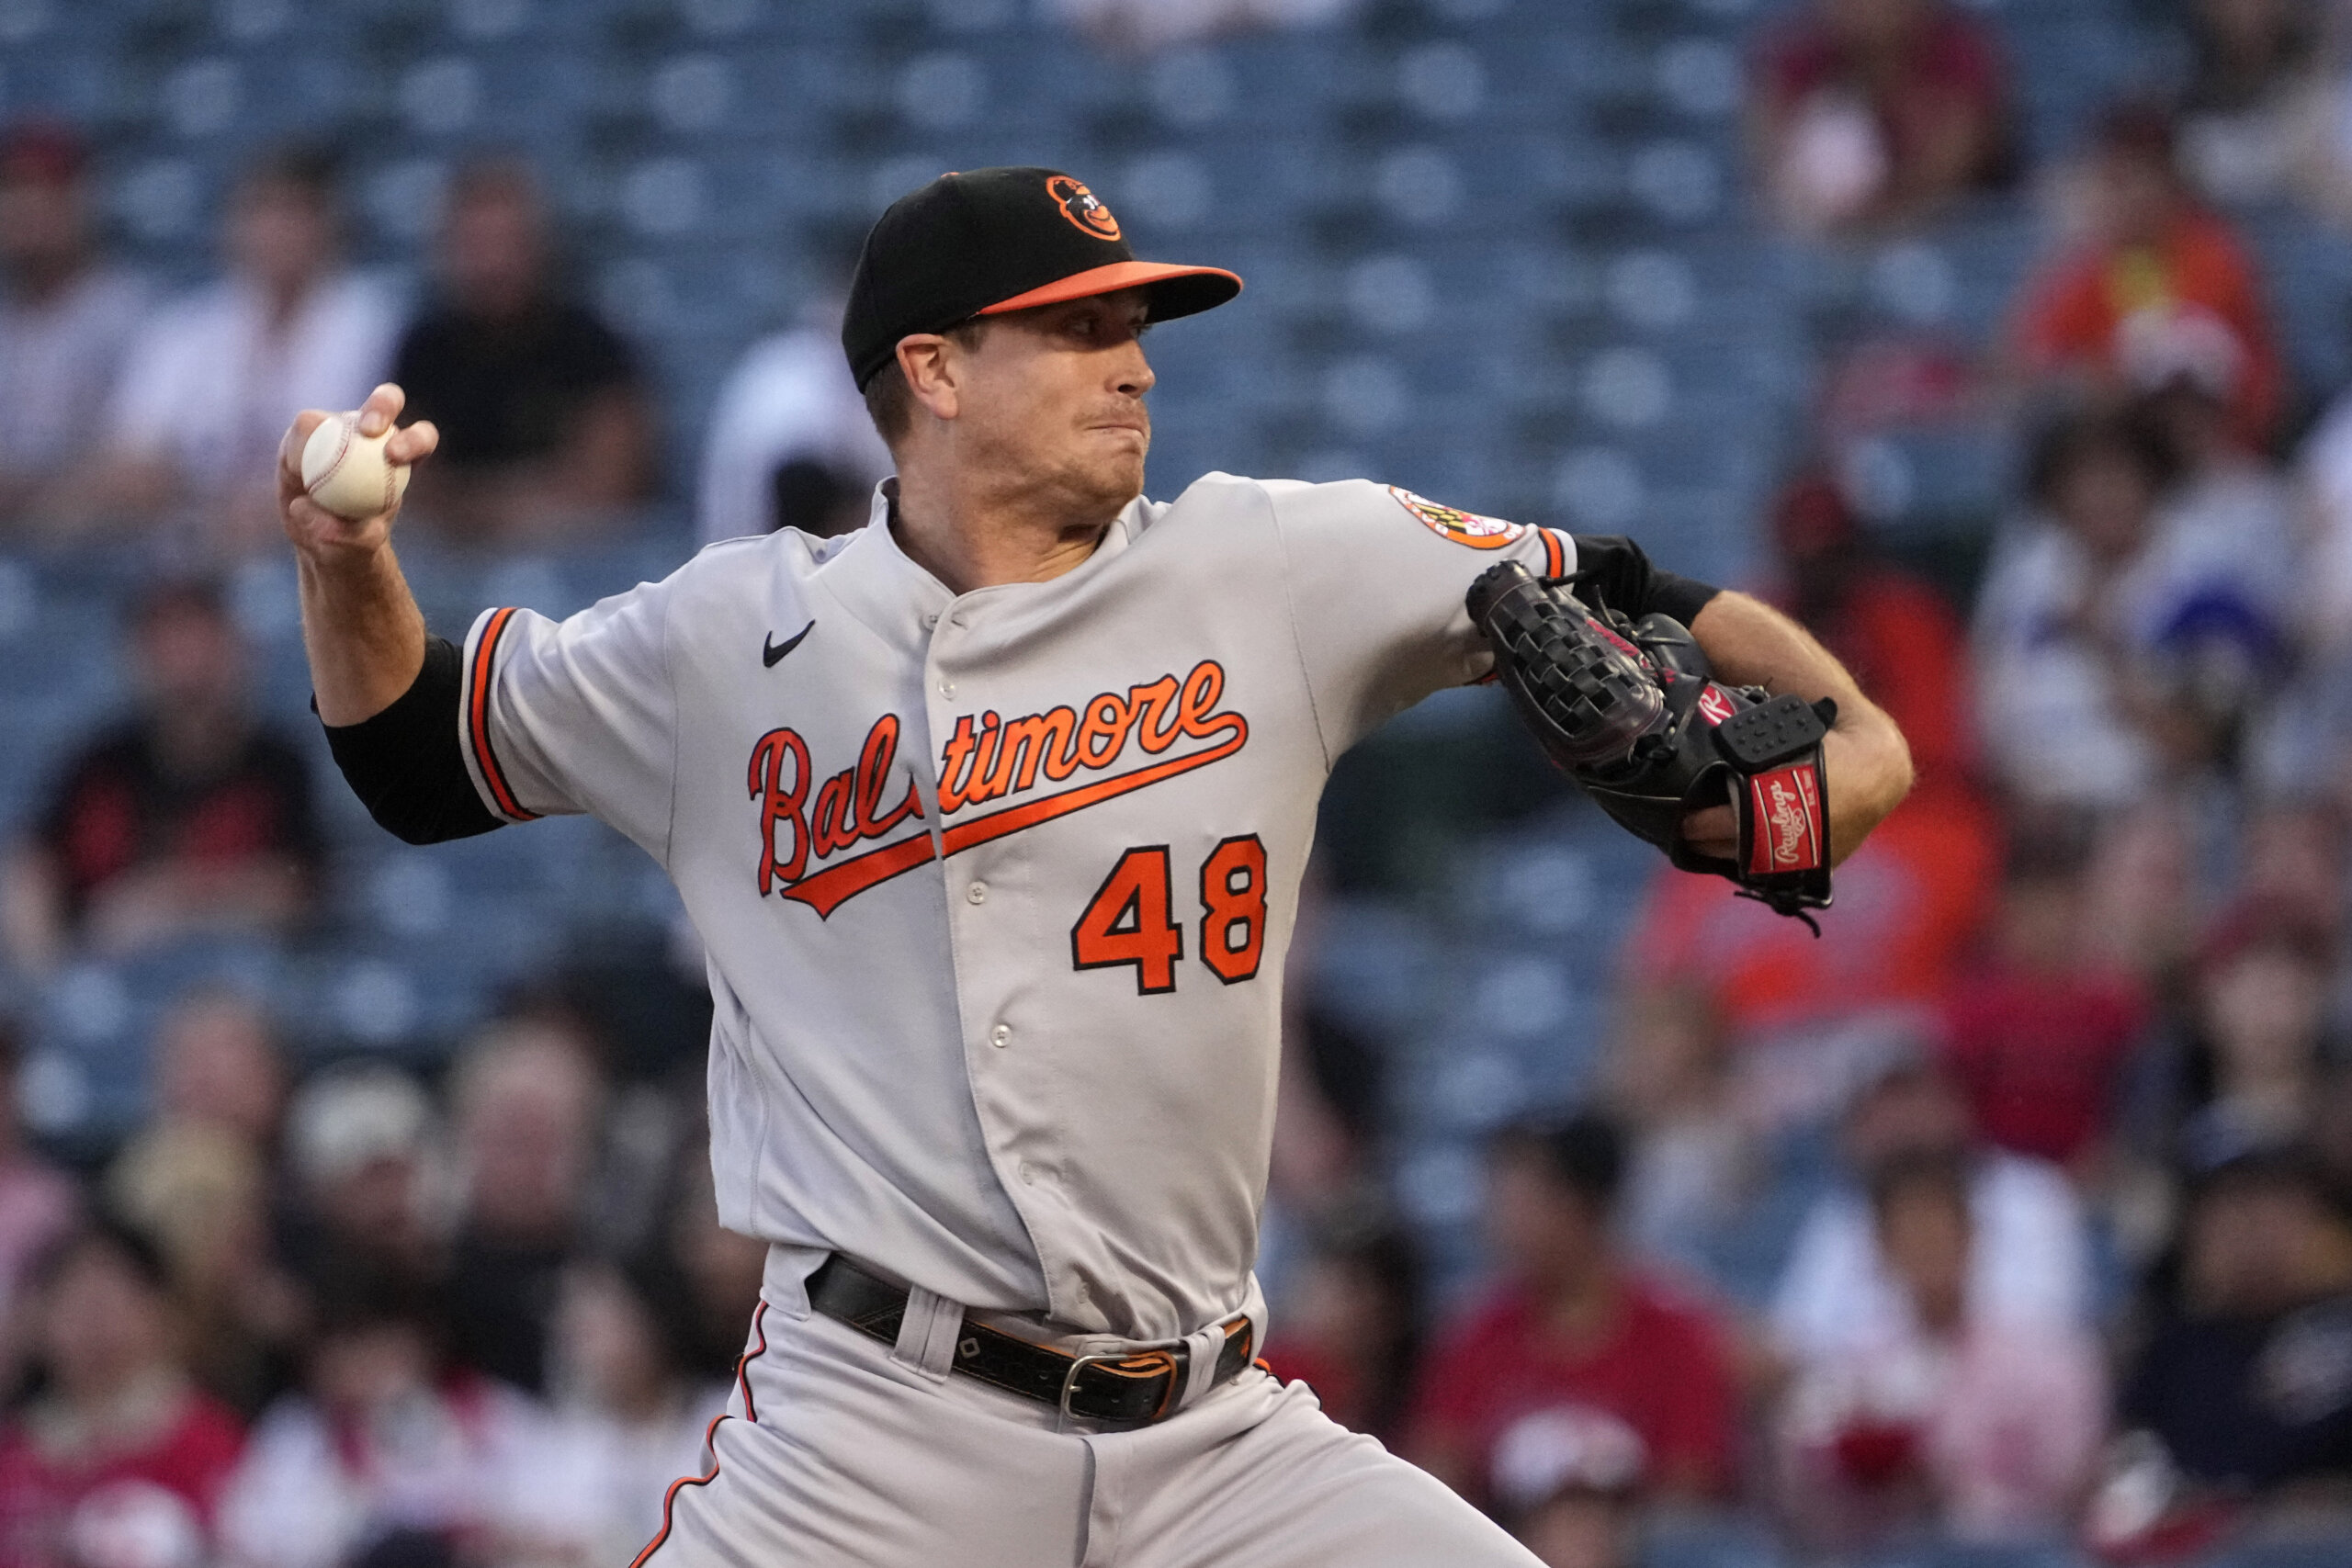 In photos: MLB: Baltimore Orioles beat Washington Nationals, get closer to  division title - All Photos 